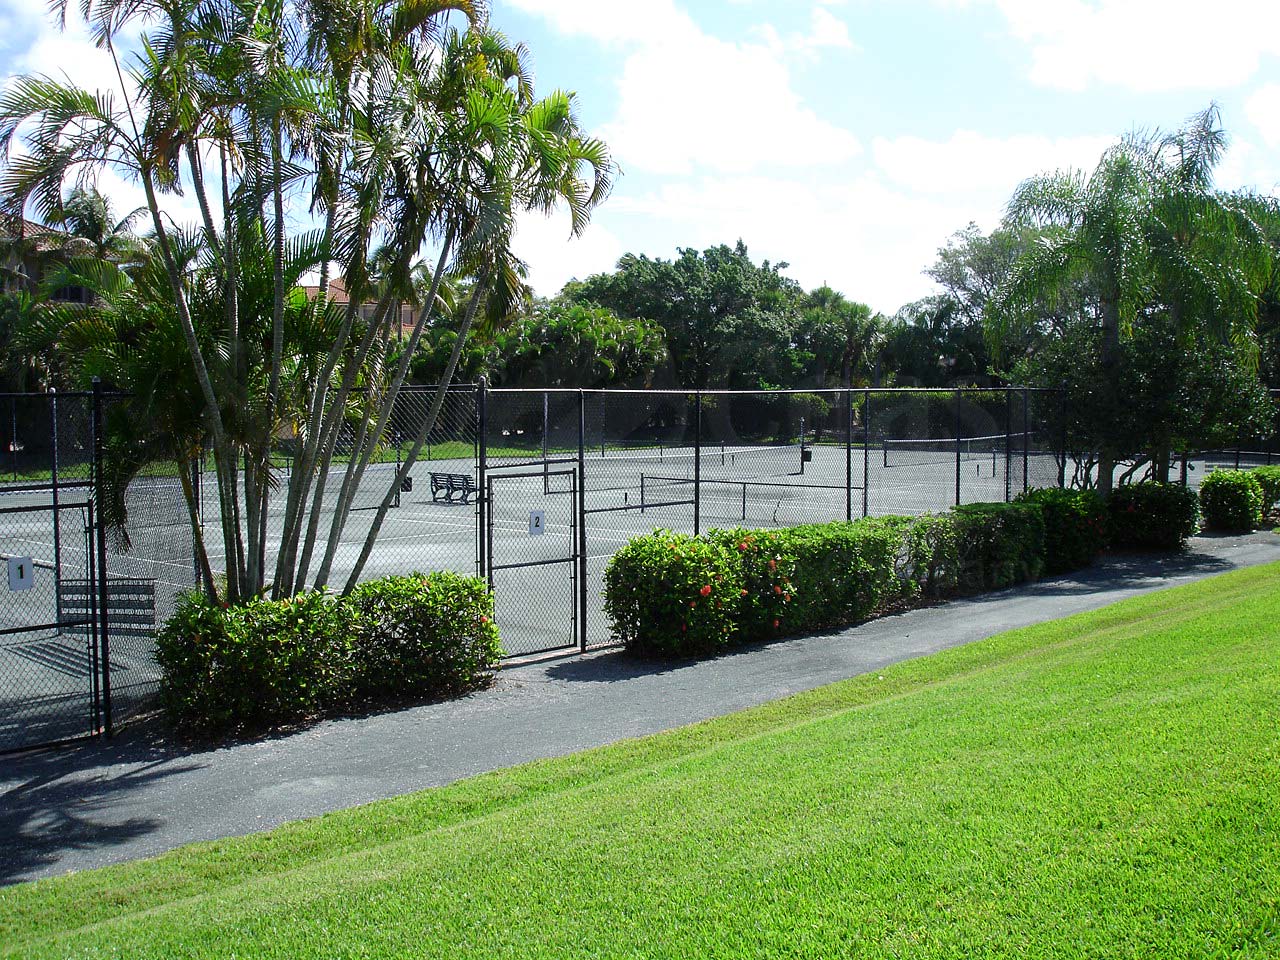 Twin Dolphins Shared Tennis Courts with La Peninsula